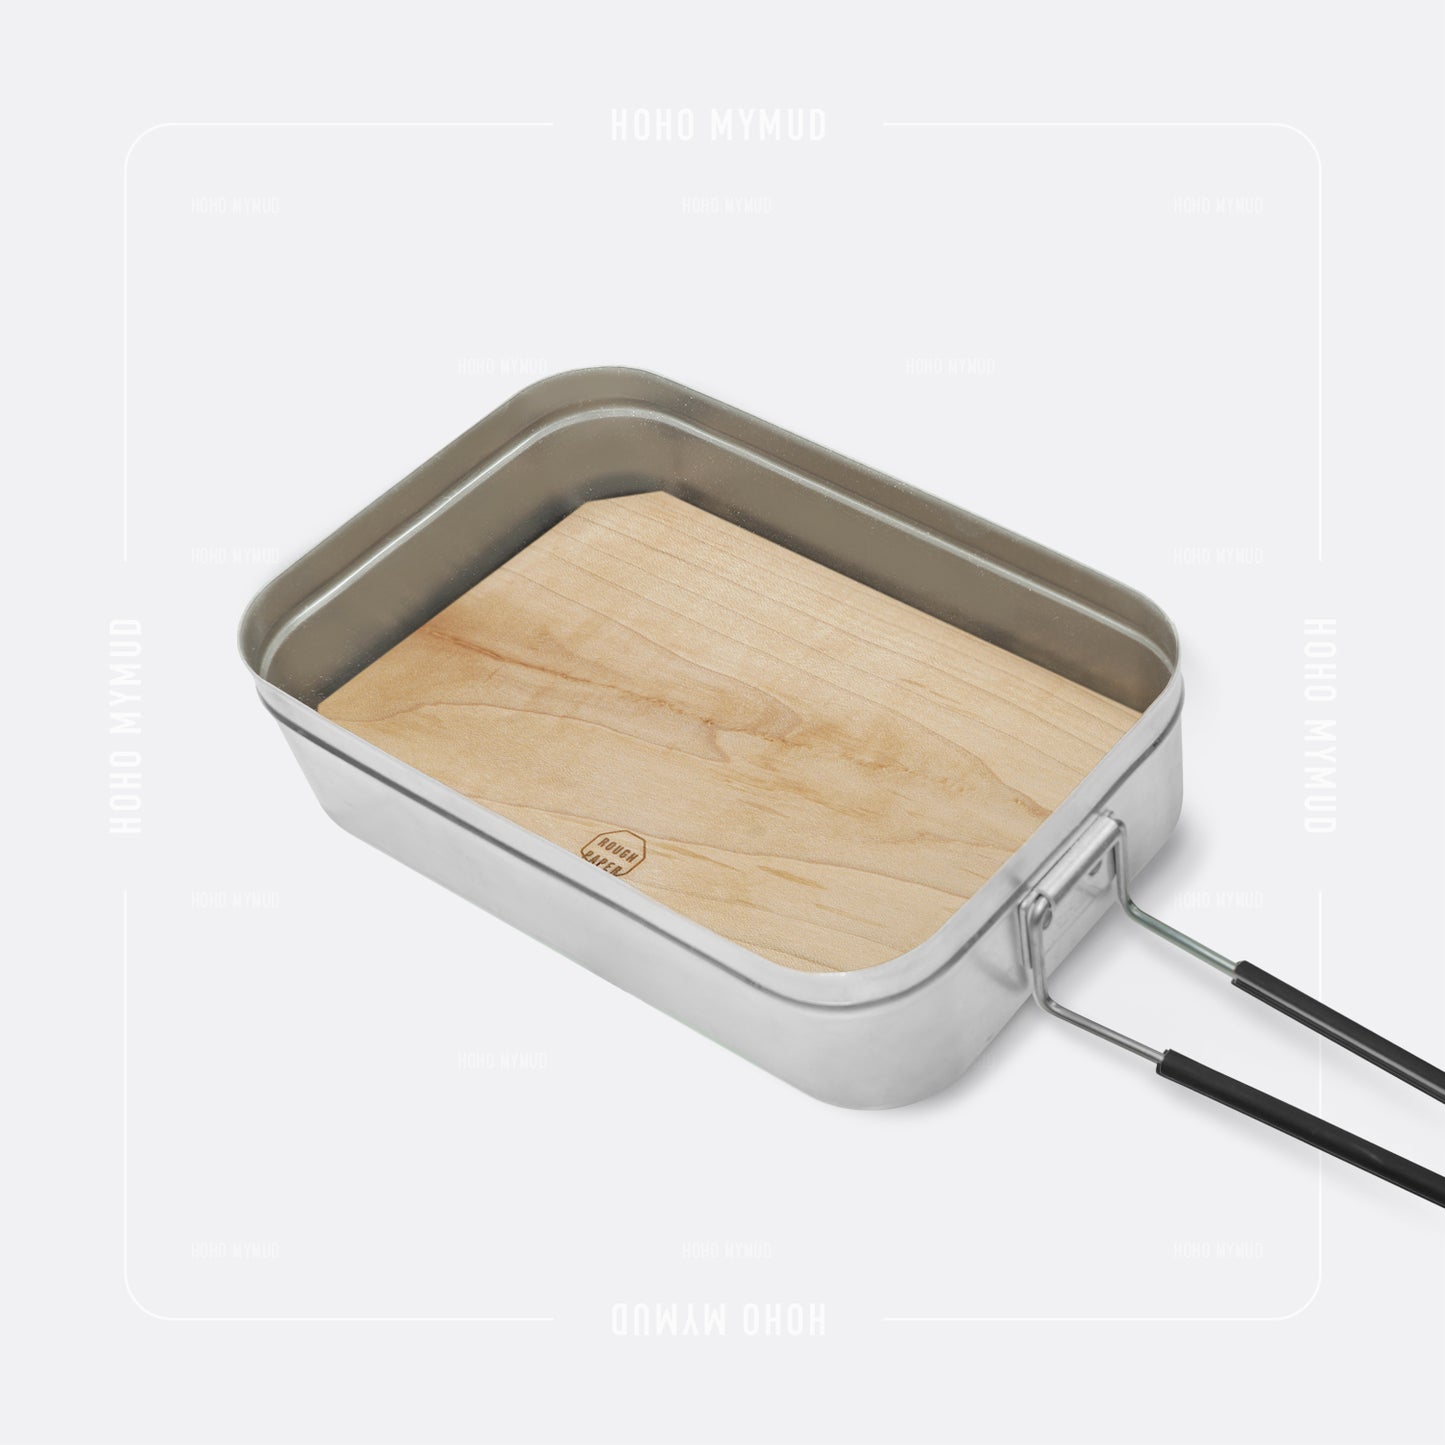 Rough Paper Wooden Cutting Board for Trangia Mess Tin 209 加拿大白楓木製便攜砧板